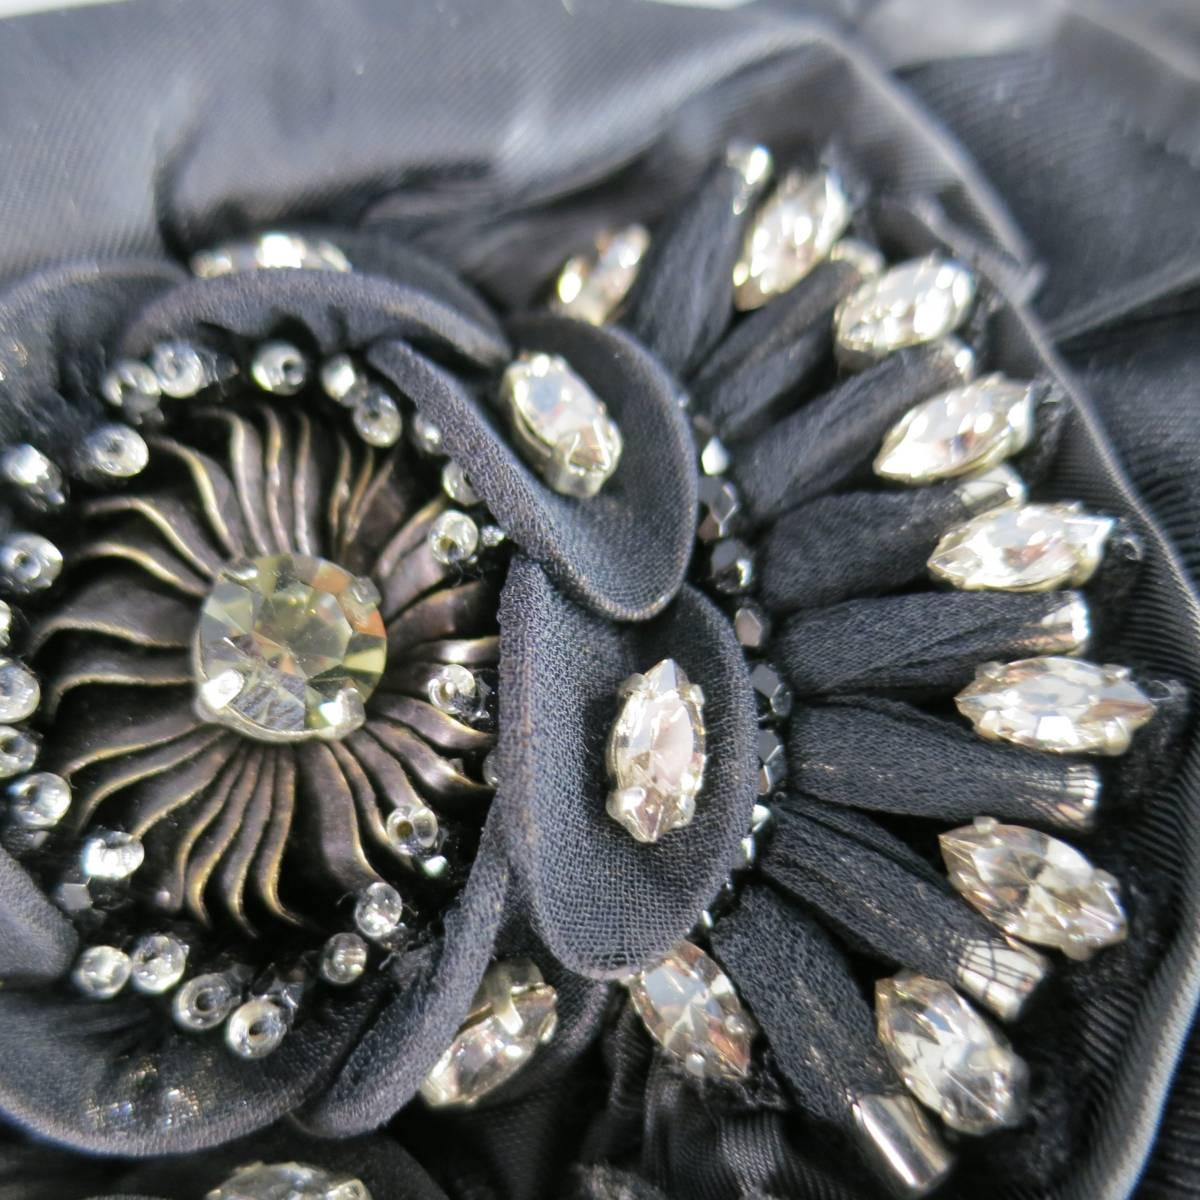 This lovely ELIE TAHARI clutch bag comes in black matte nylon with a gathered top zip closure, and ruffled ribbon and satin details with gorgeous rhinestone crystal flower embellishments.
 
Brand New Condition.
 
Measurements:
 
Length: 14